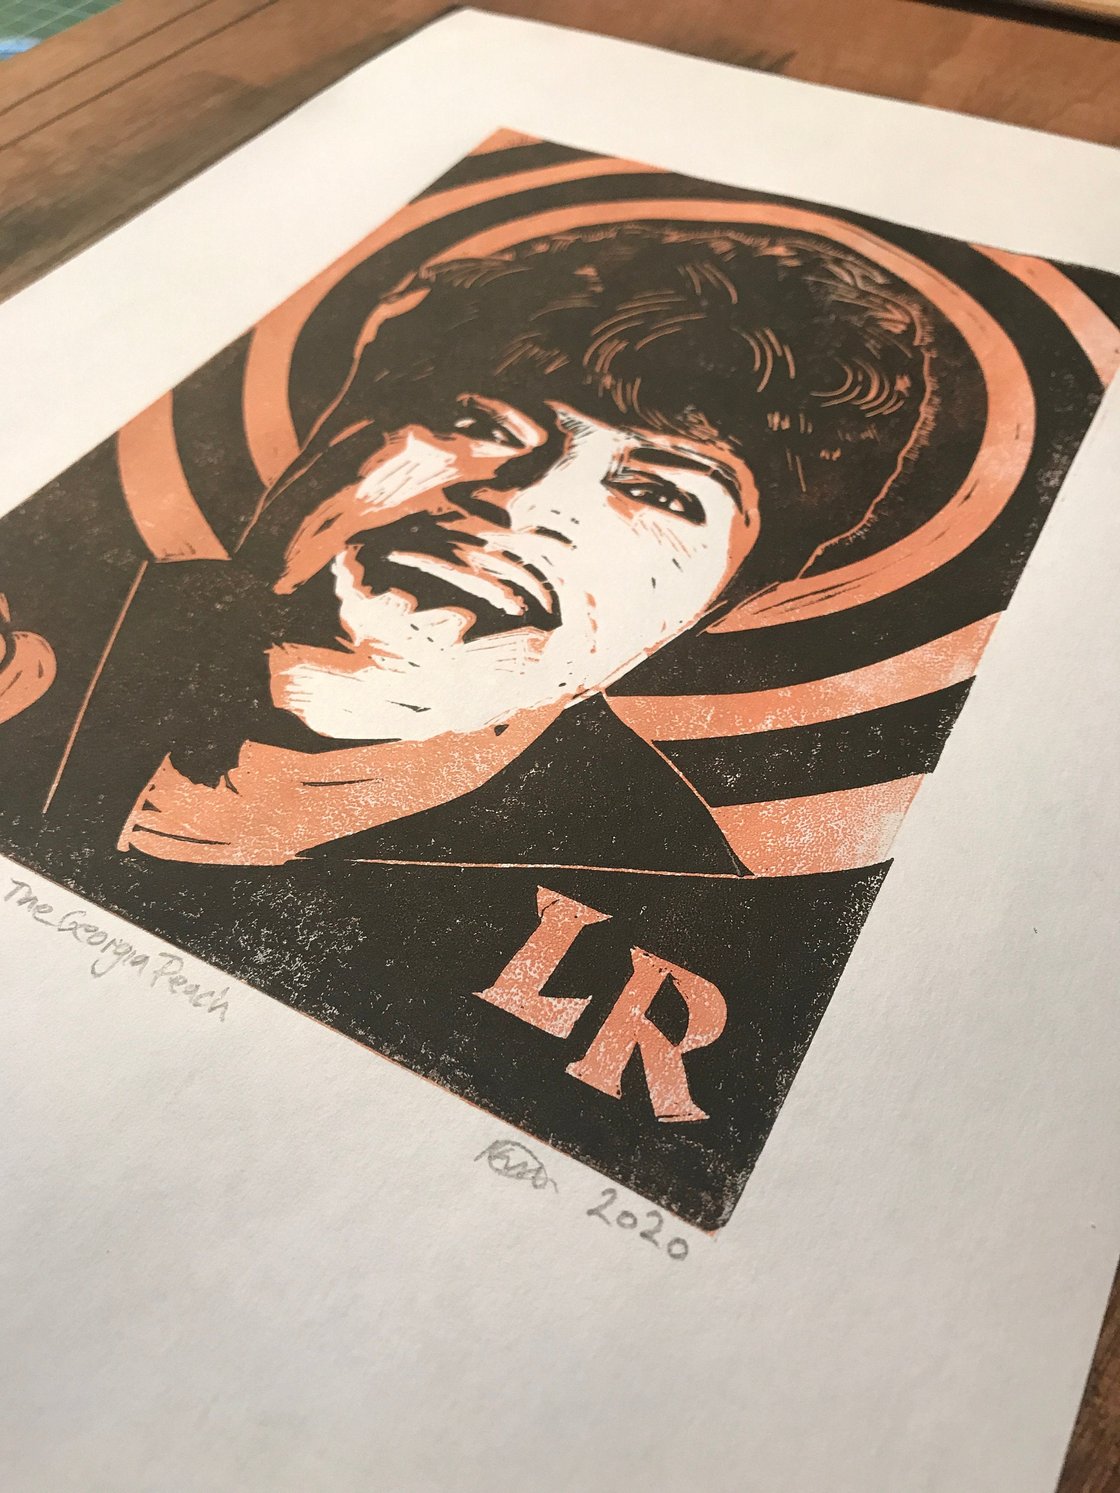 Image of Little Richard. Hand Made. Original A4 linocut print. Limited/signed.